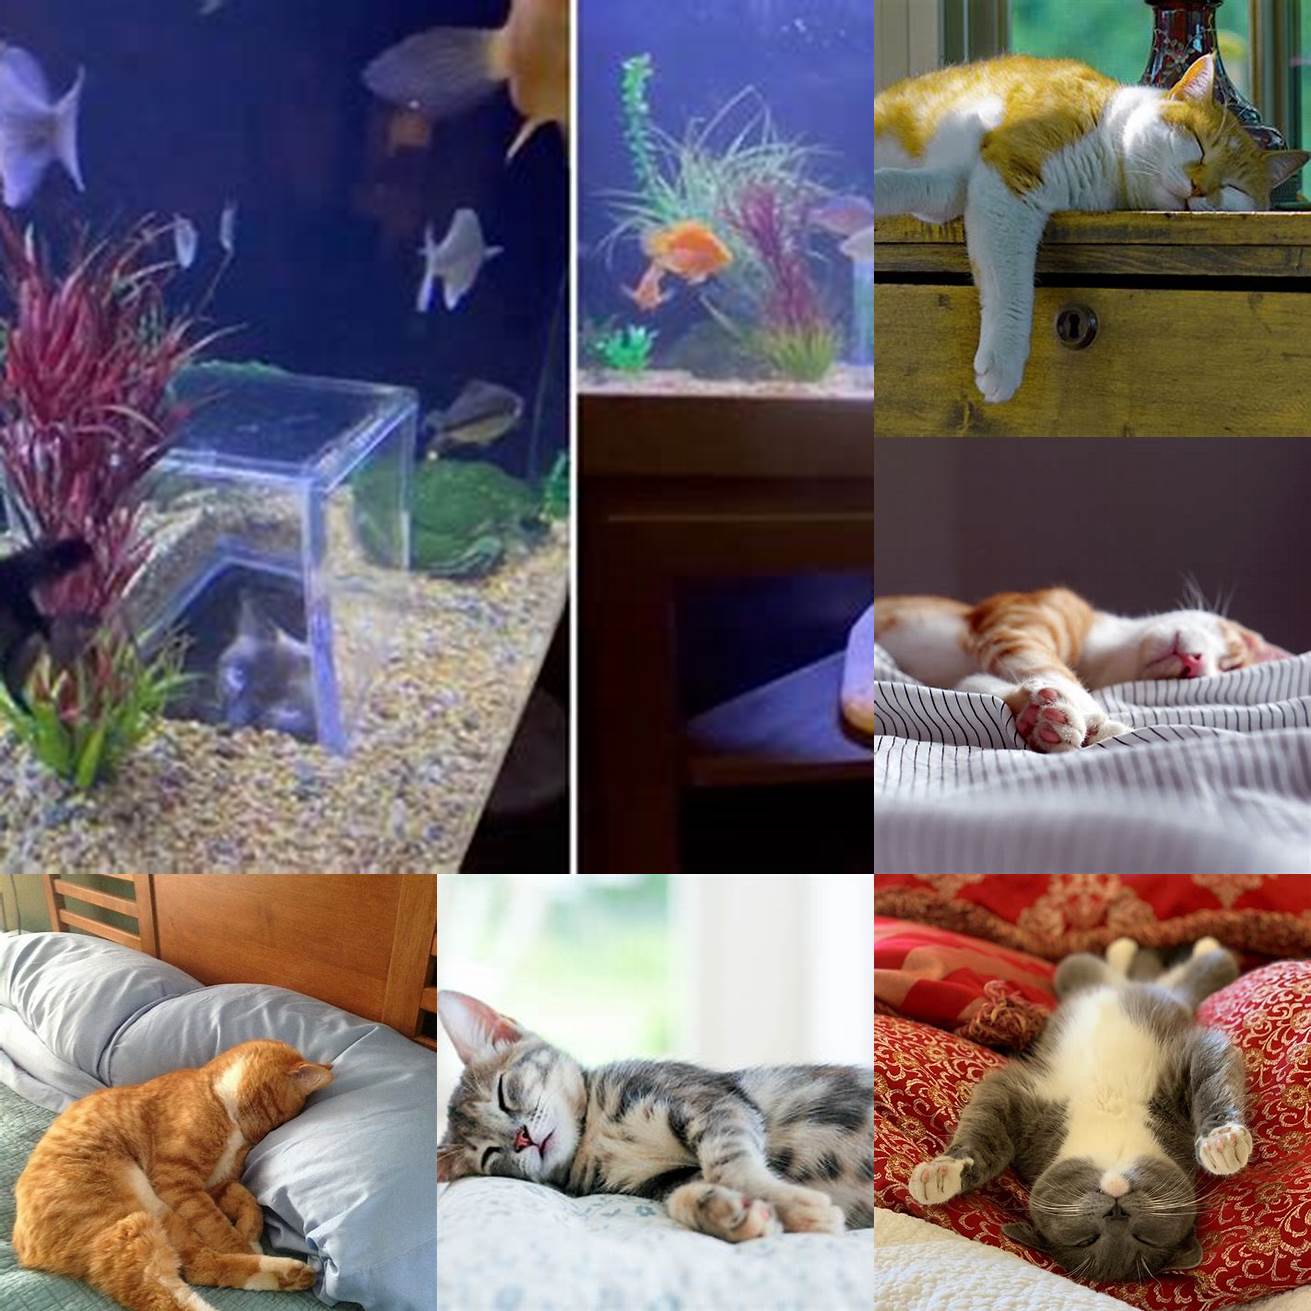 The cat napping next to the fish tank